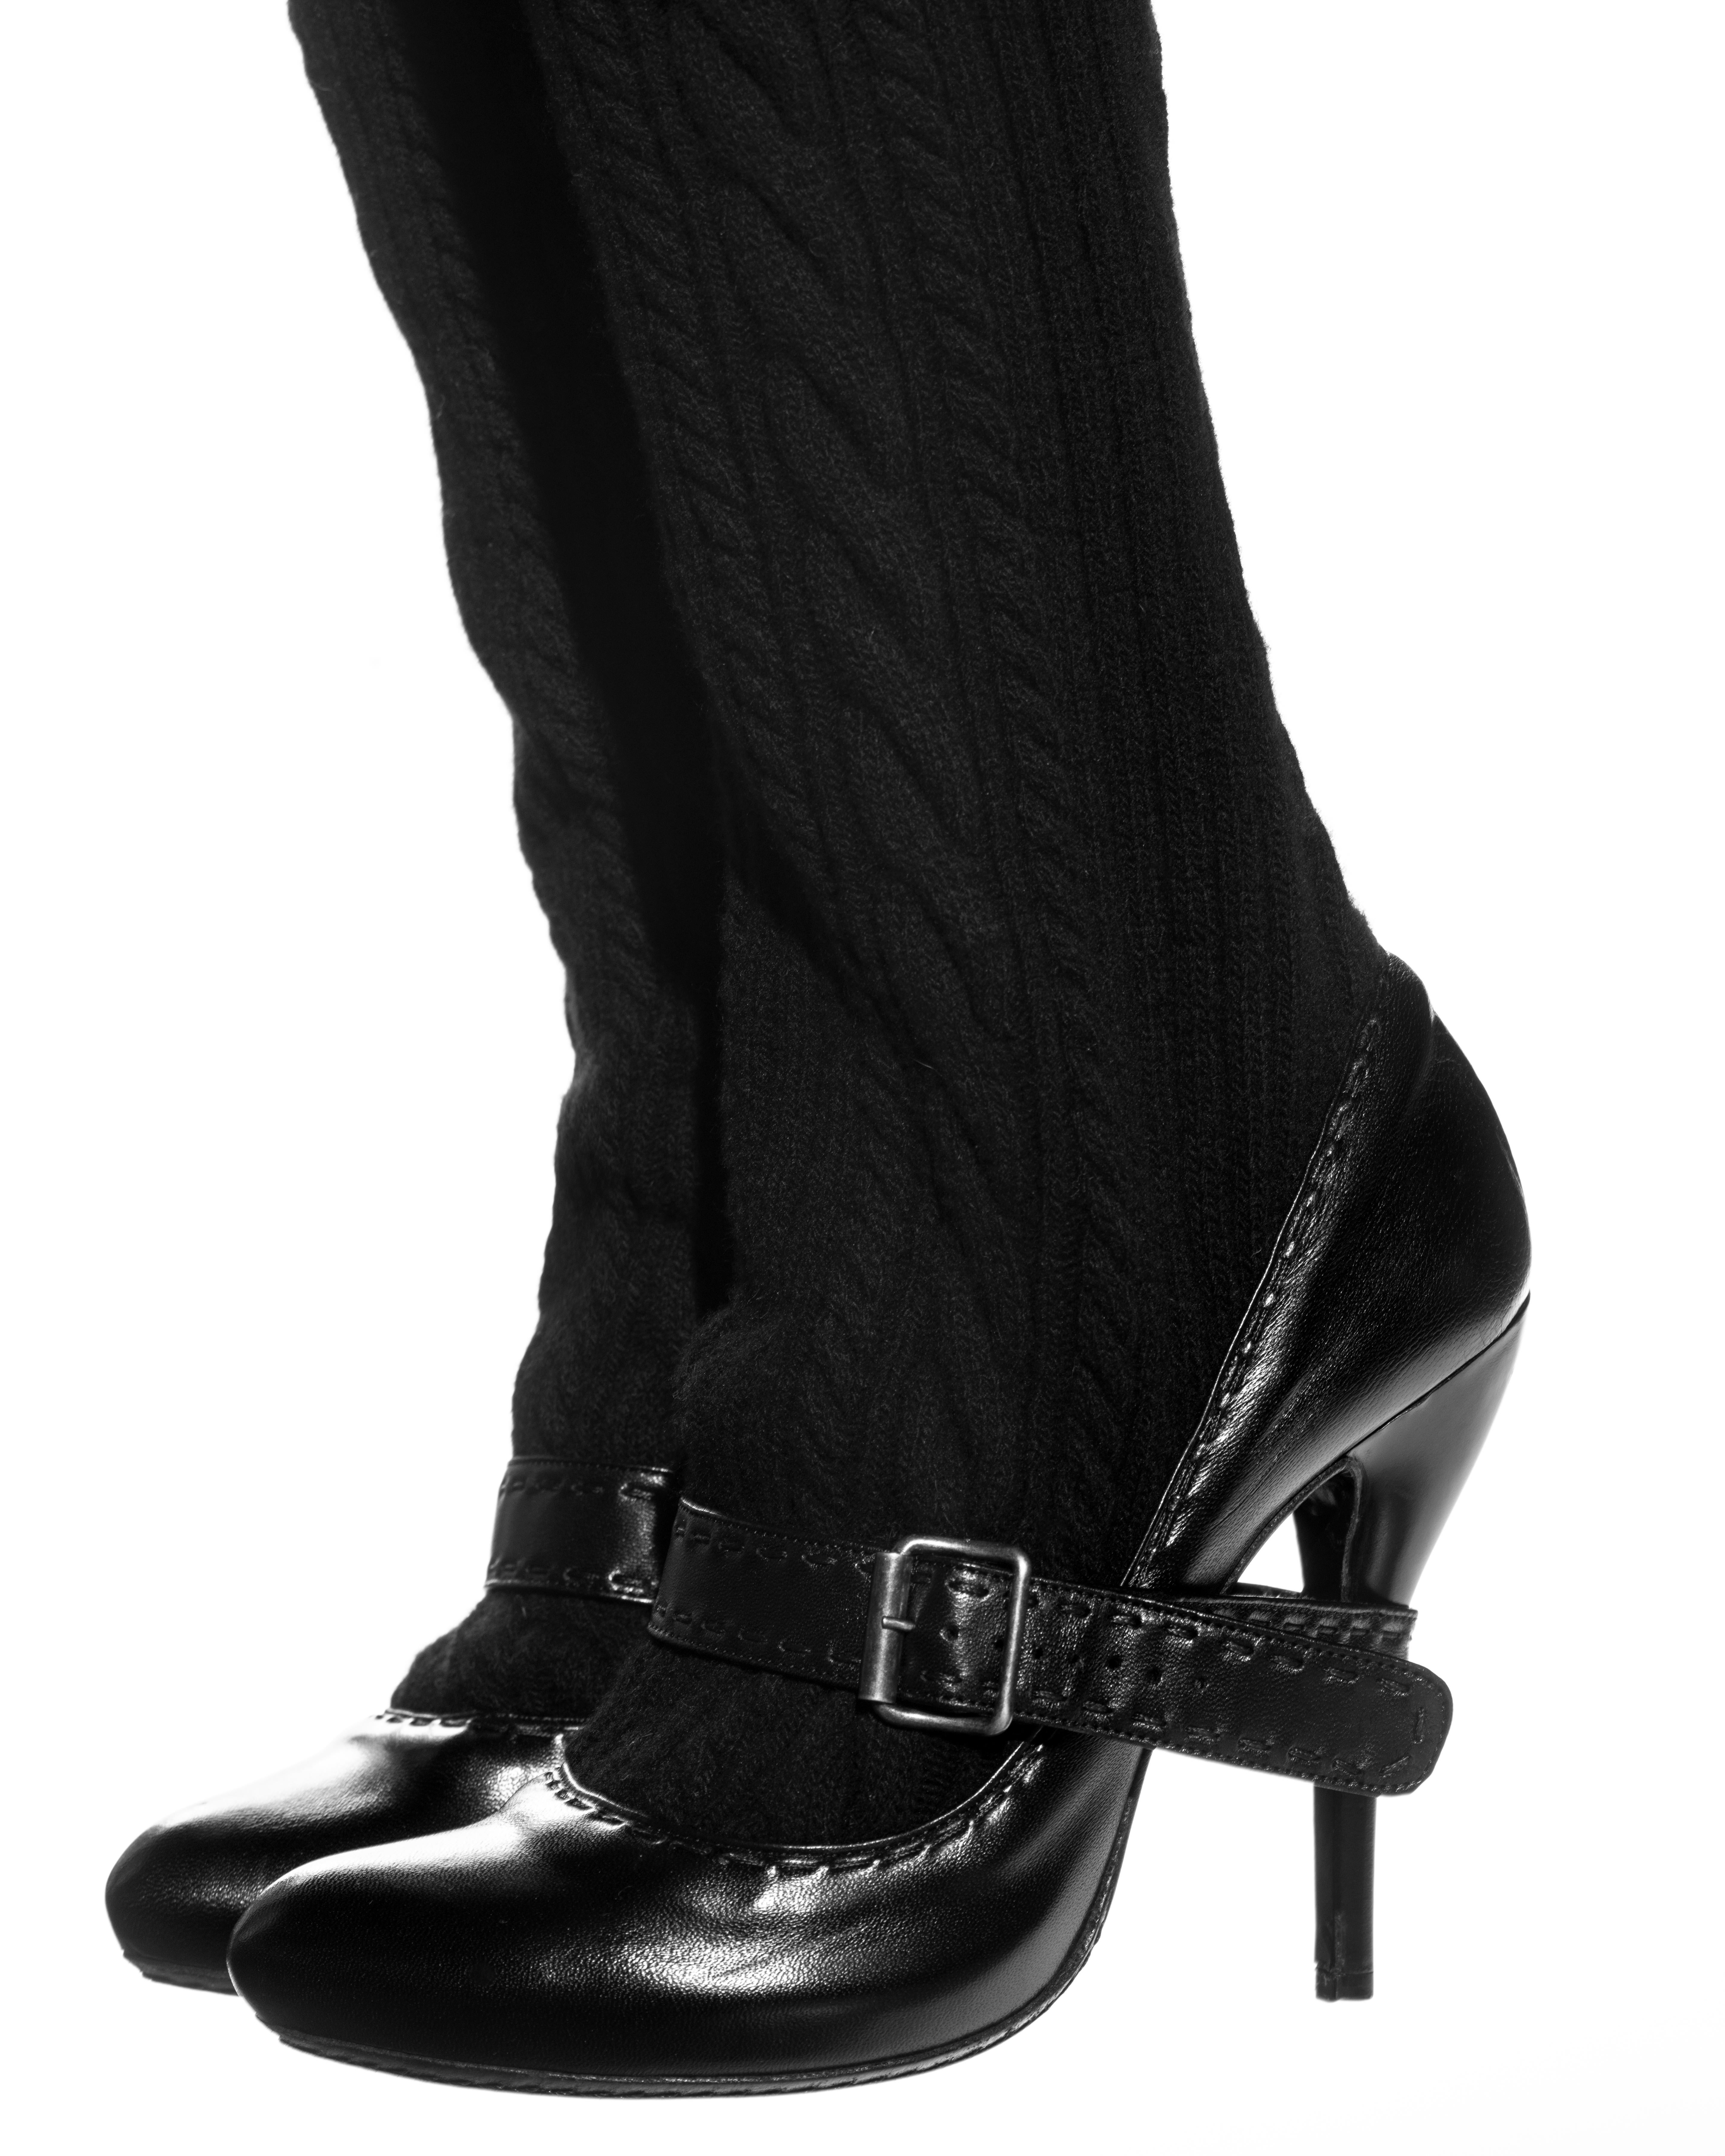 Alexander McQueen black leather thigh-high sock boots, fw 2006 In Excellent Condition For Sale In London, GB